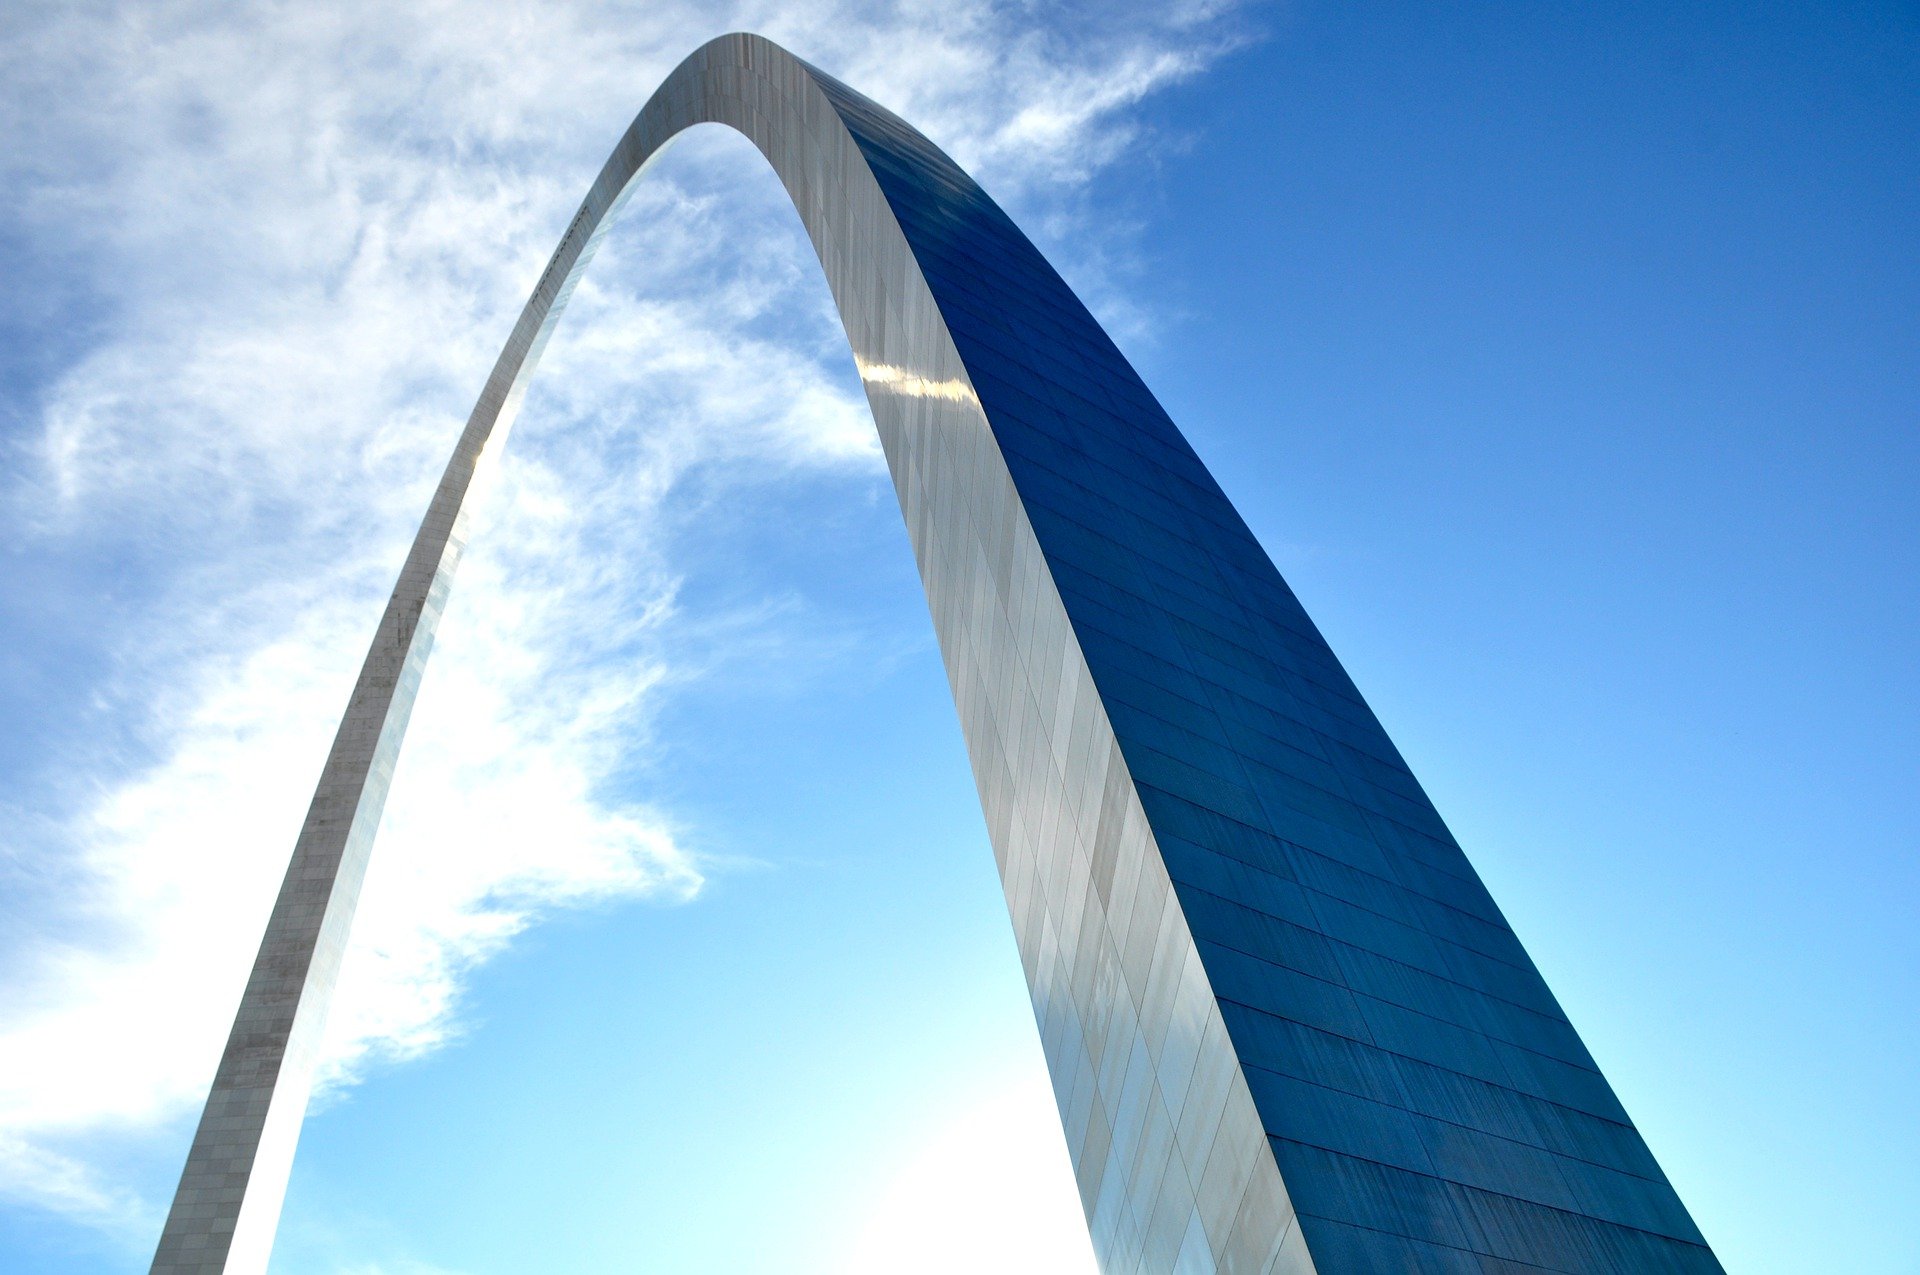 The Arch in St. Louis, MO